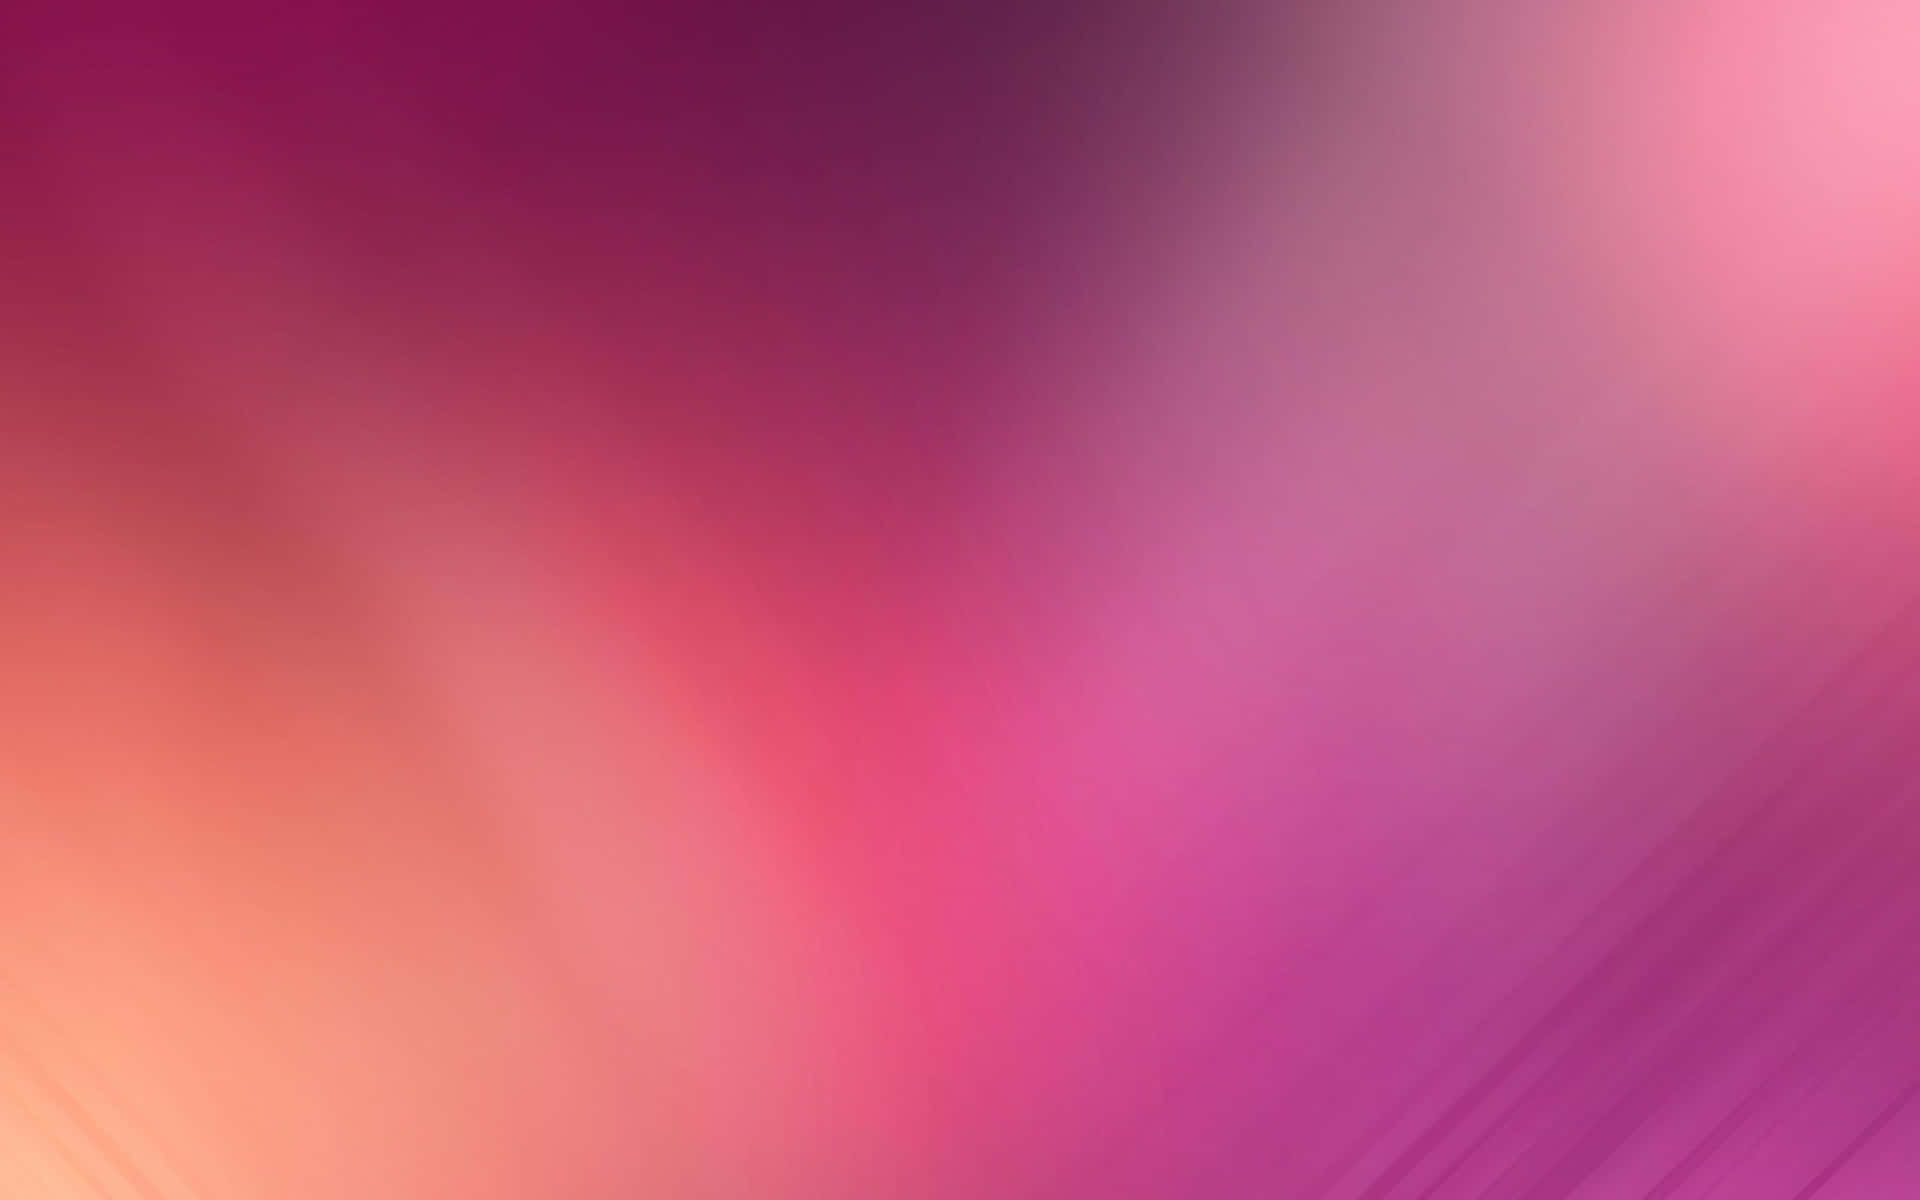 Colorful and dynamic pink abstract background